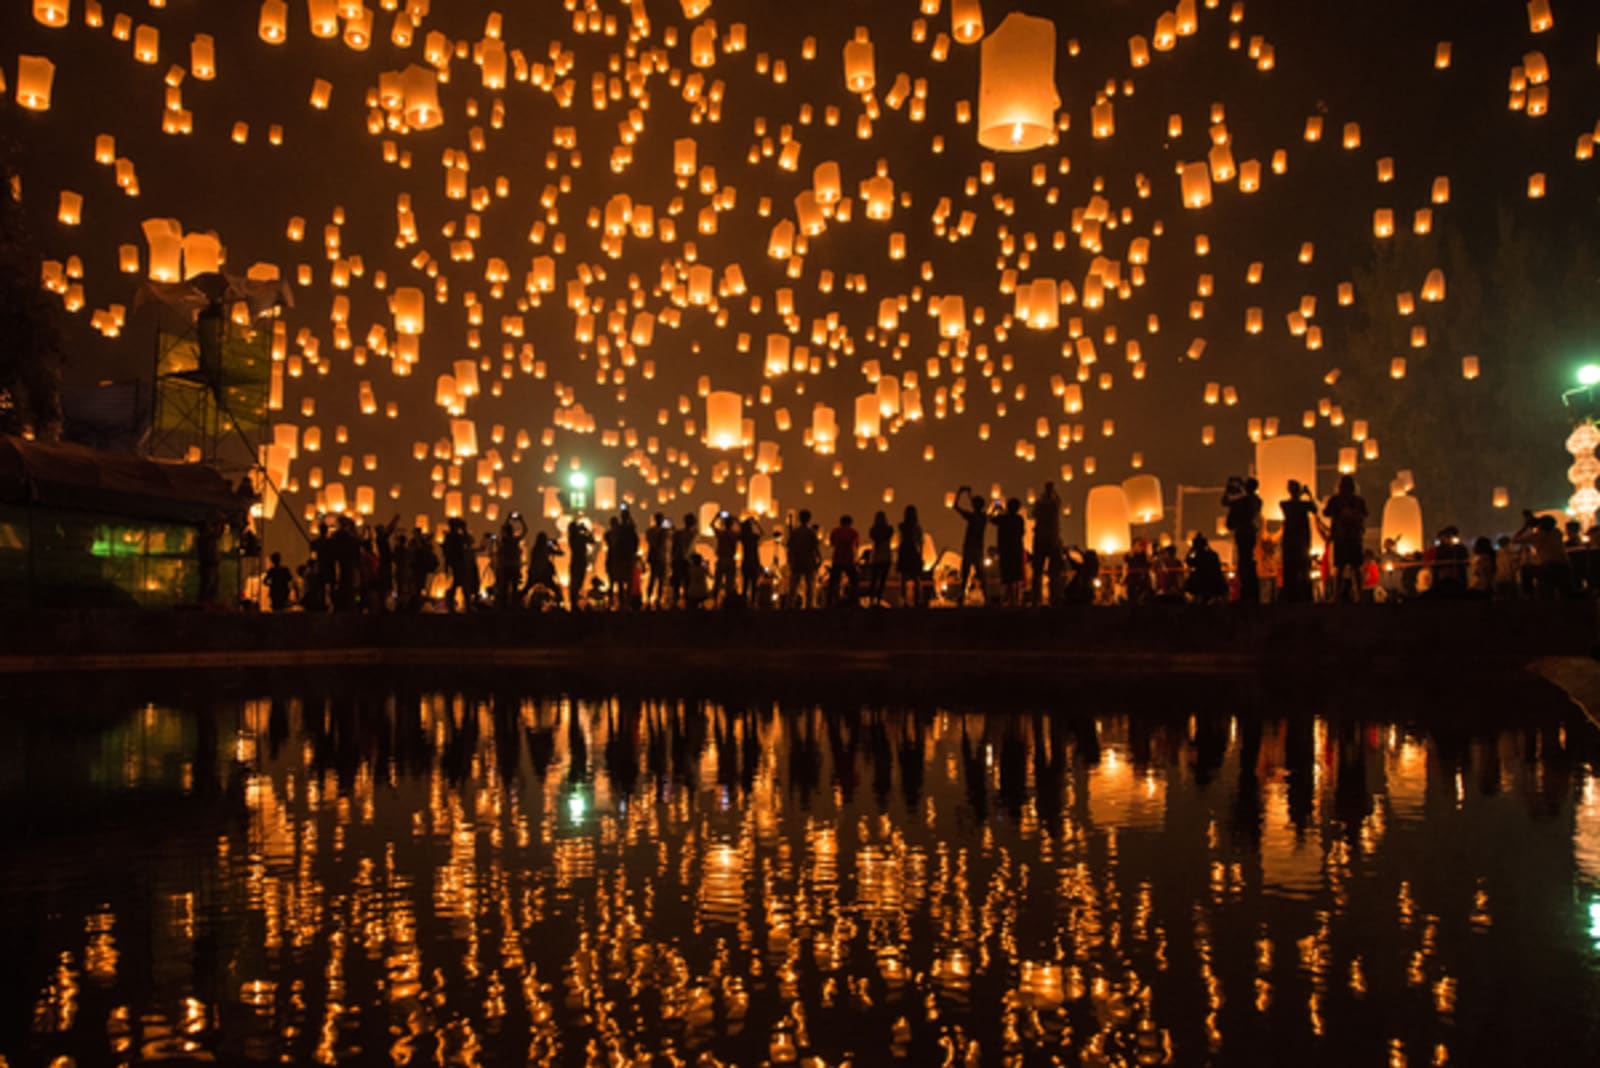 thousands of lanterns in sky at night reflected in water in Thailand